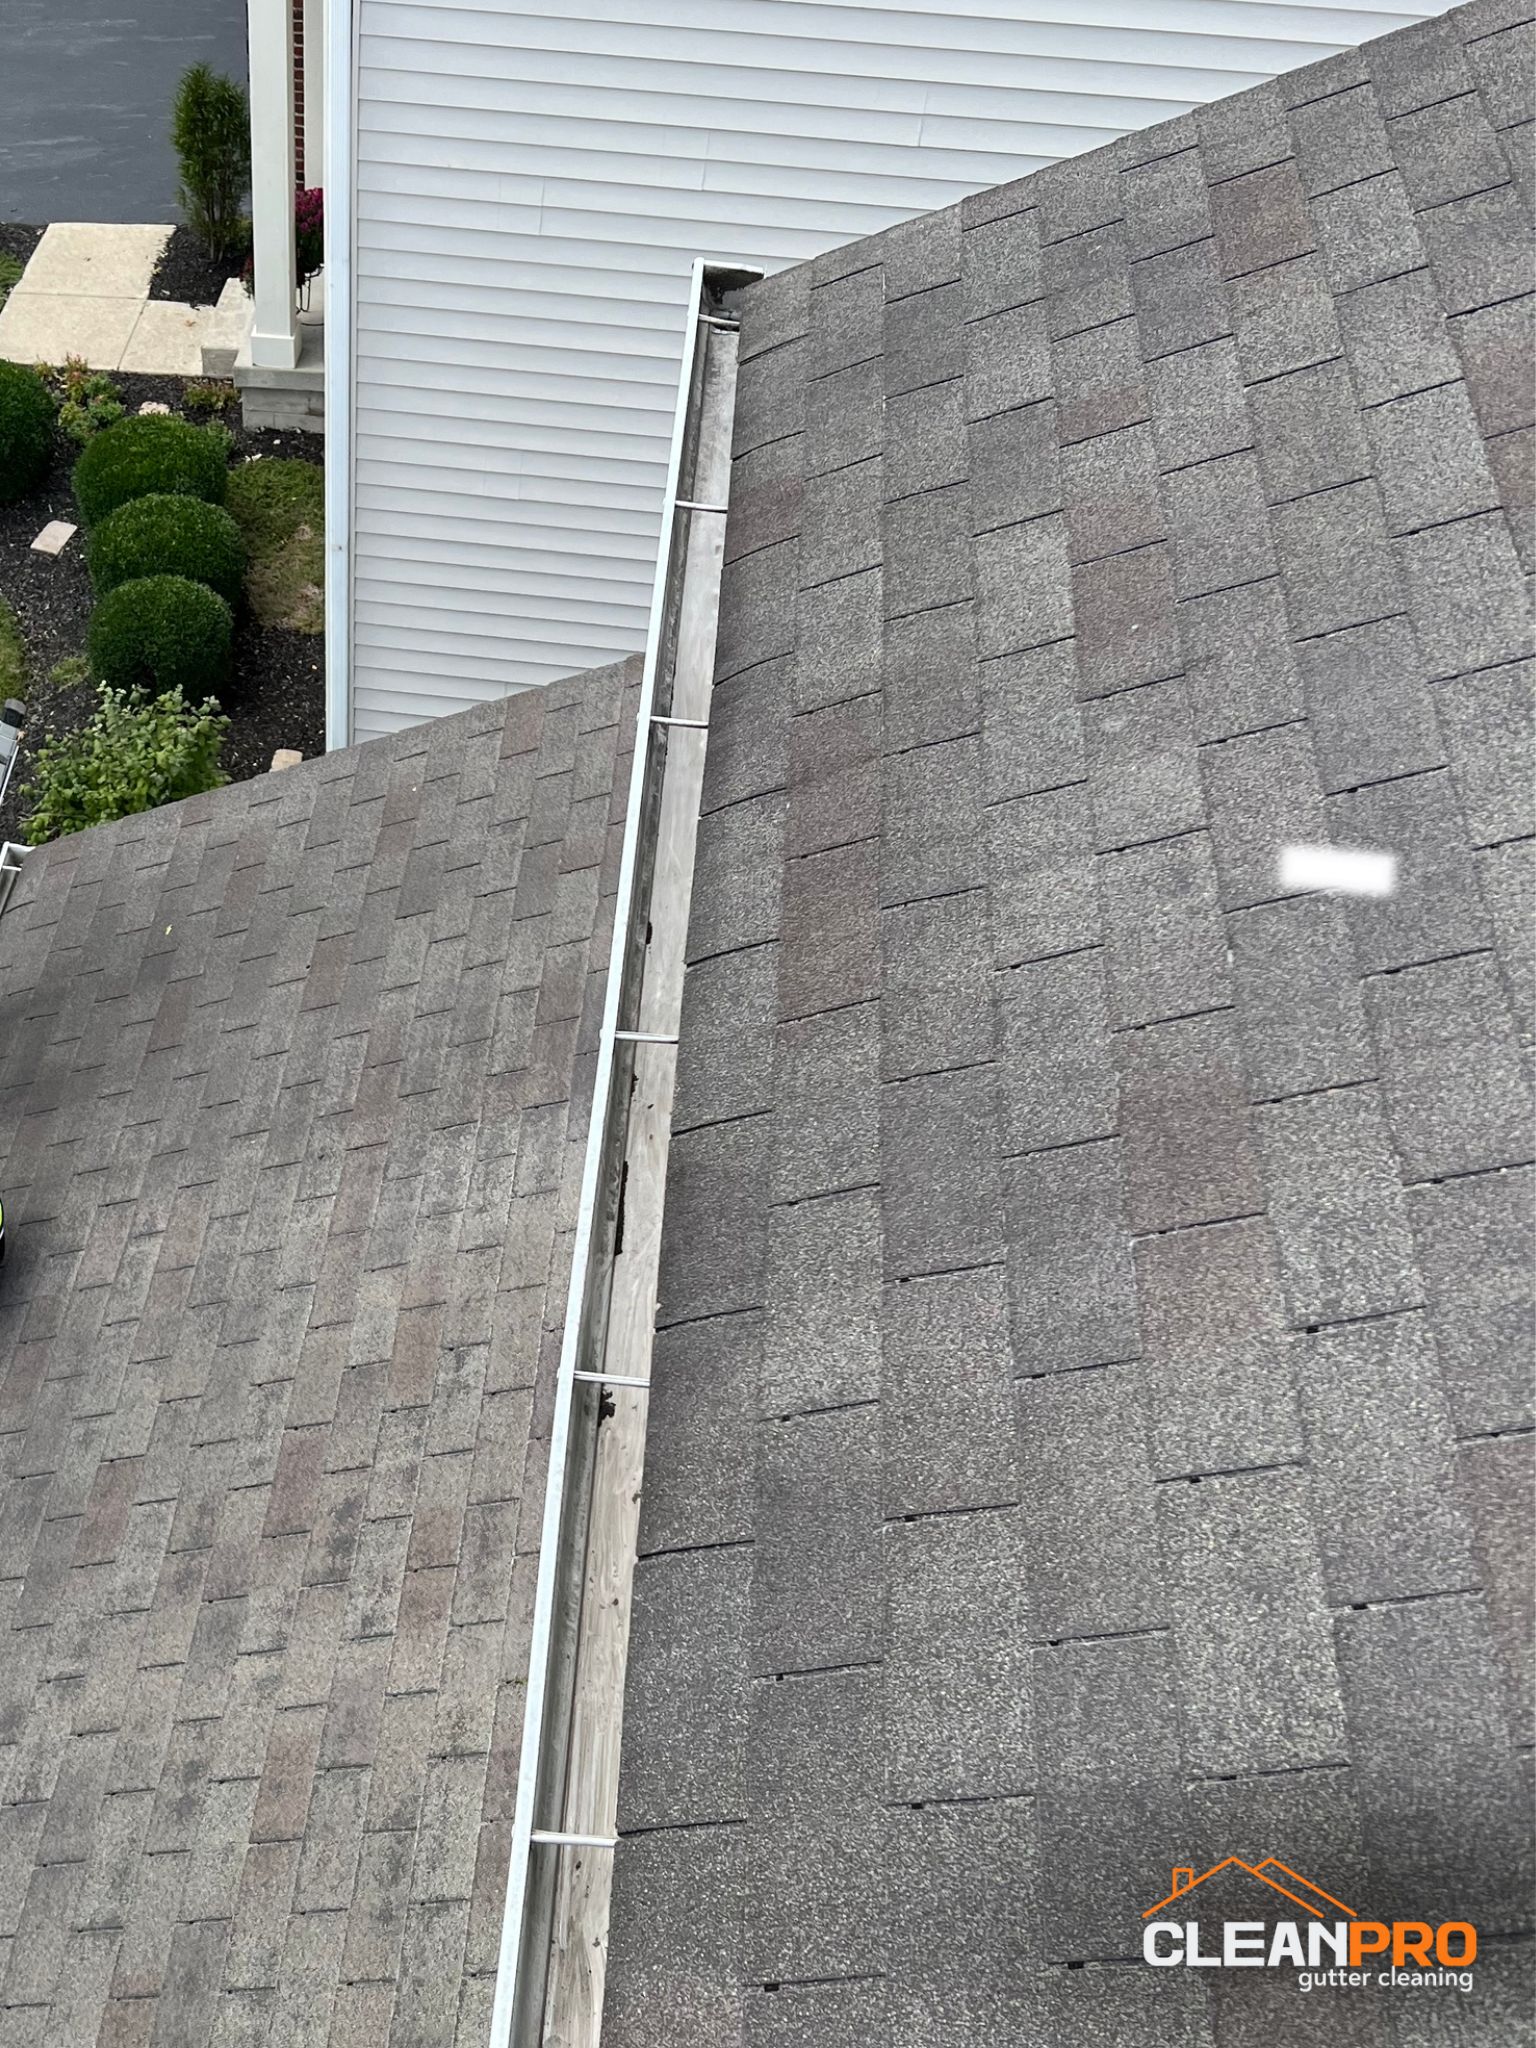 Local Gutter Cleaning in Raleigh 